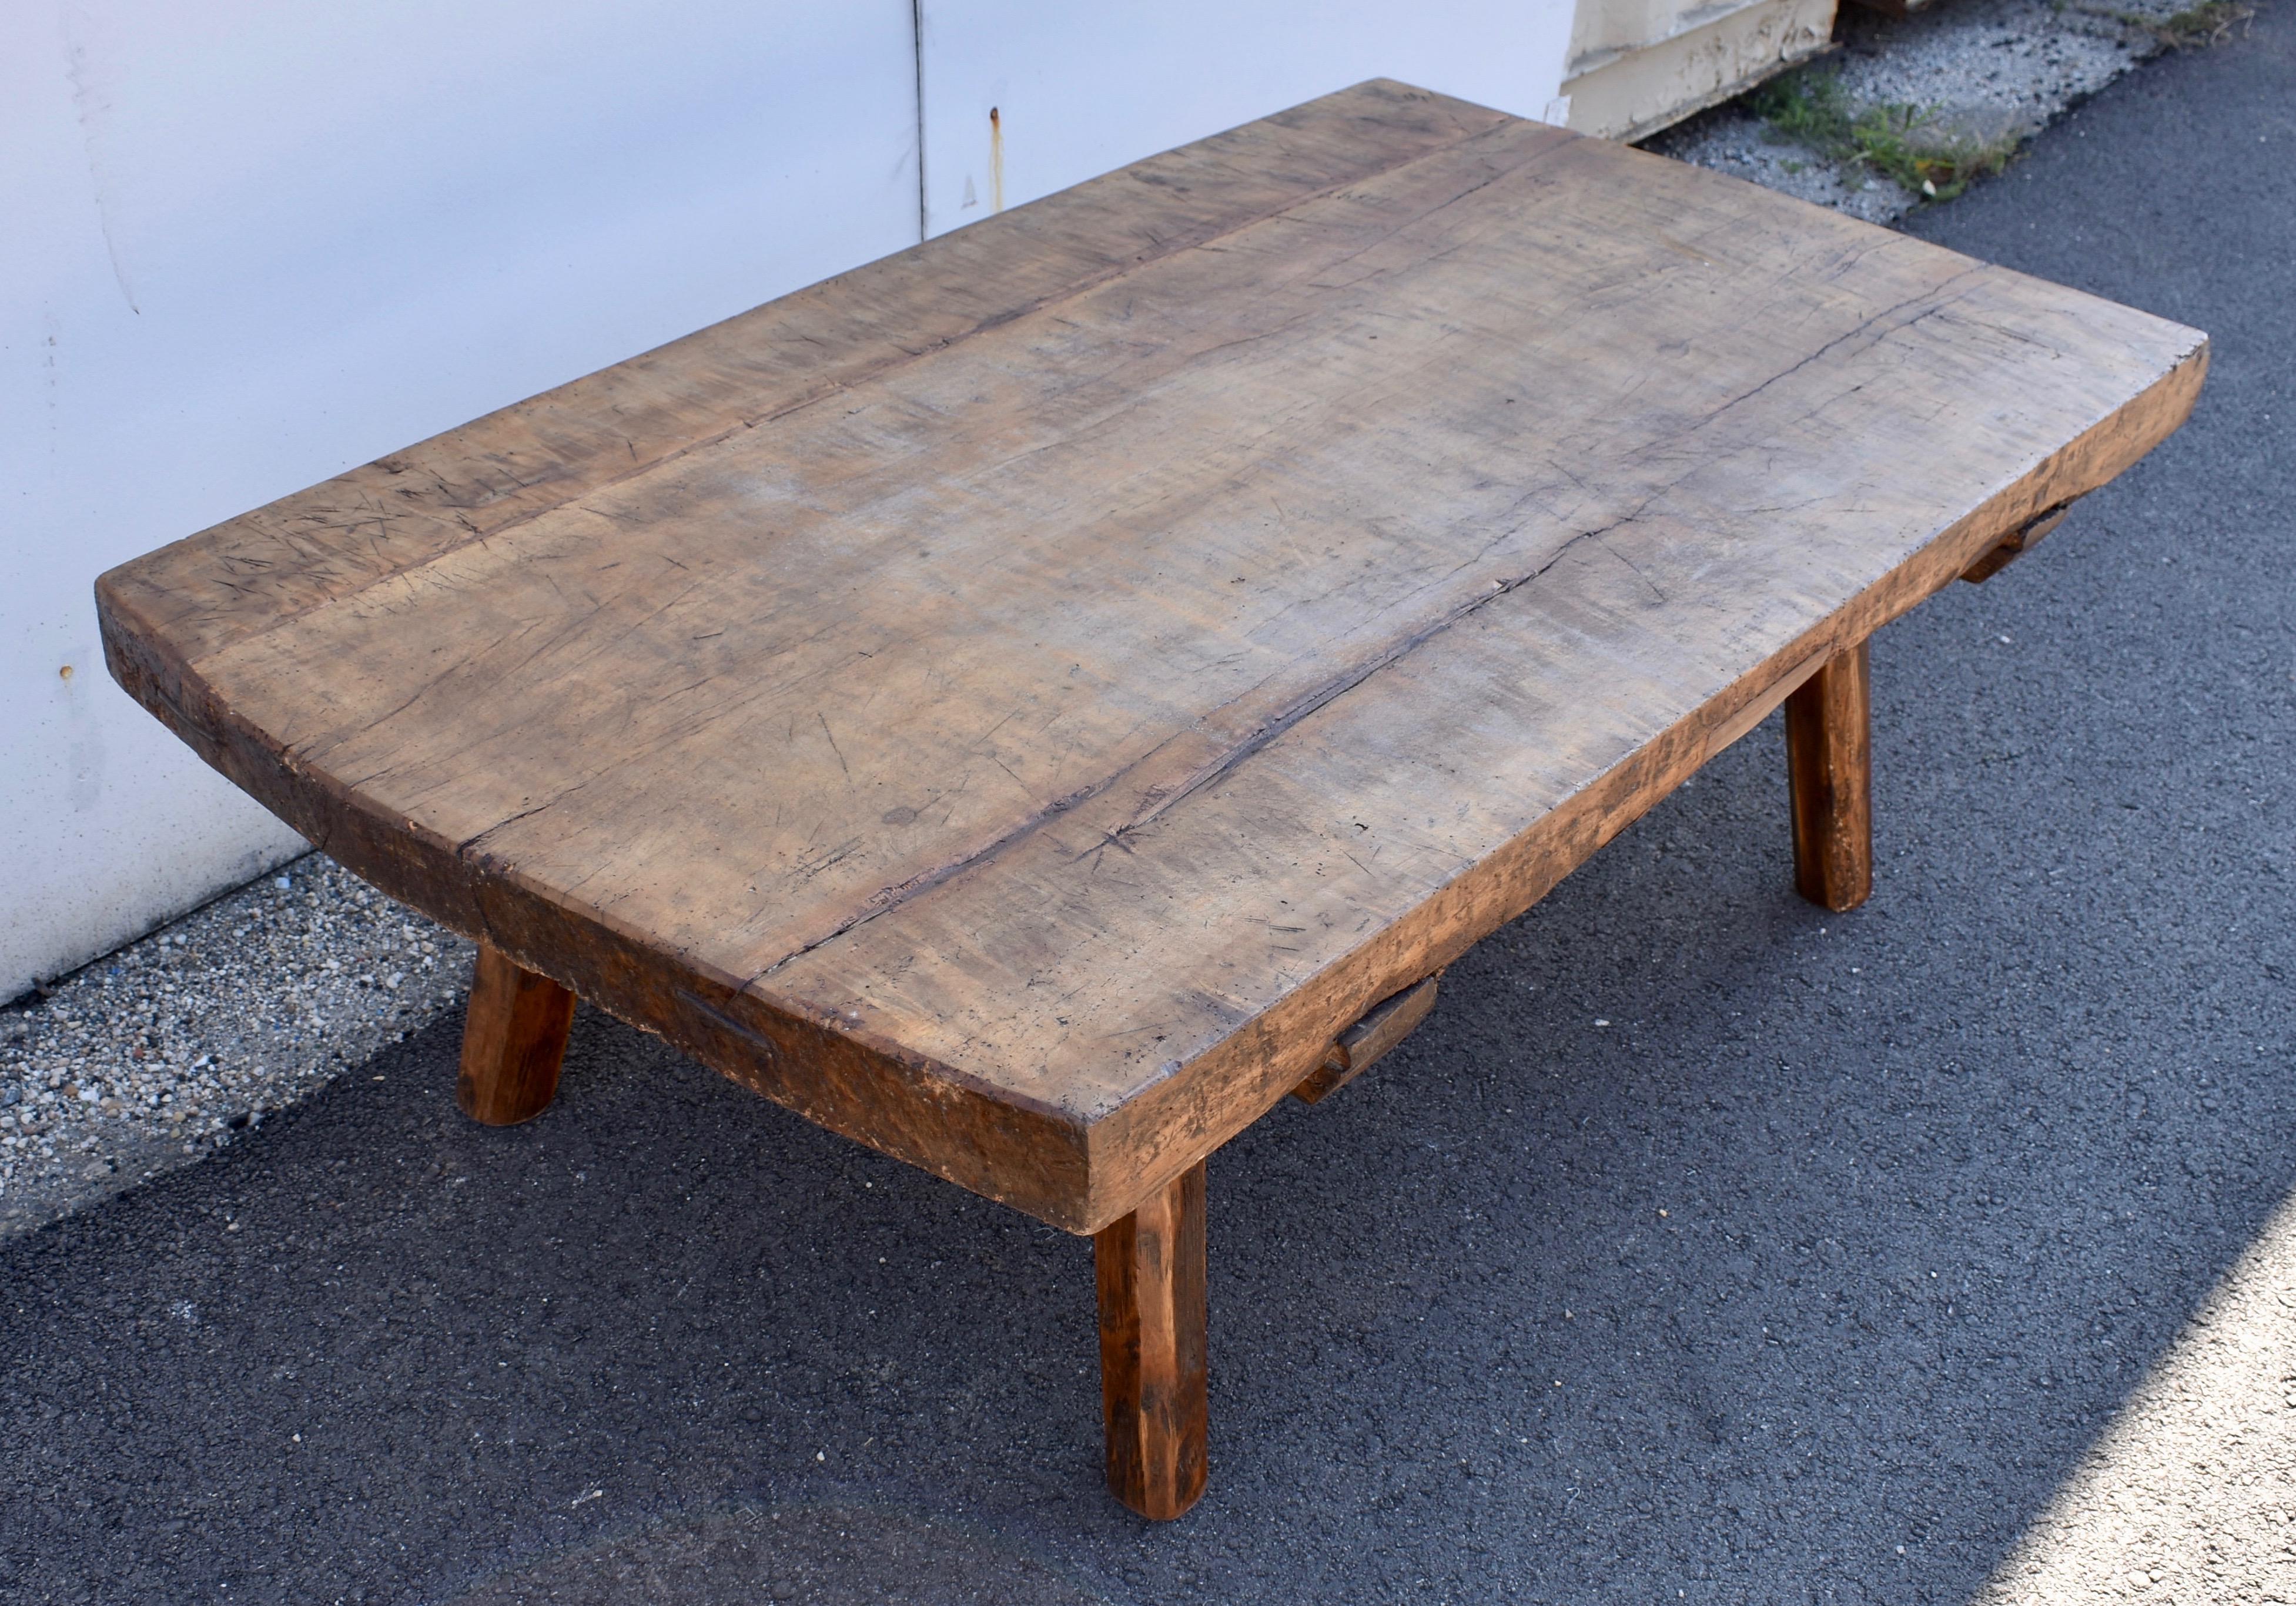 Polished Oak Pig Bench Butcher's Block Coffee Table For Sale